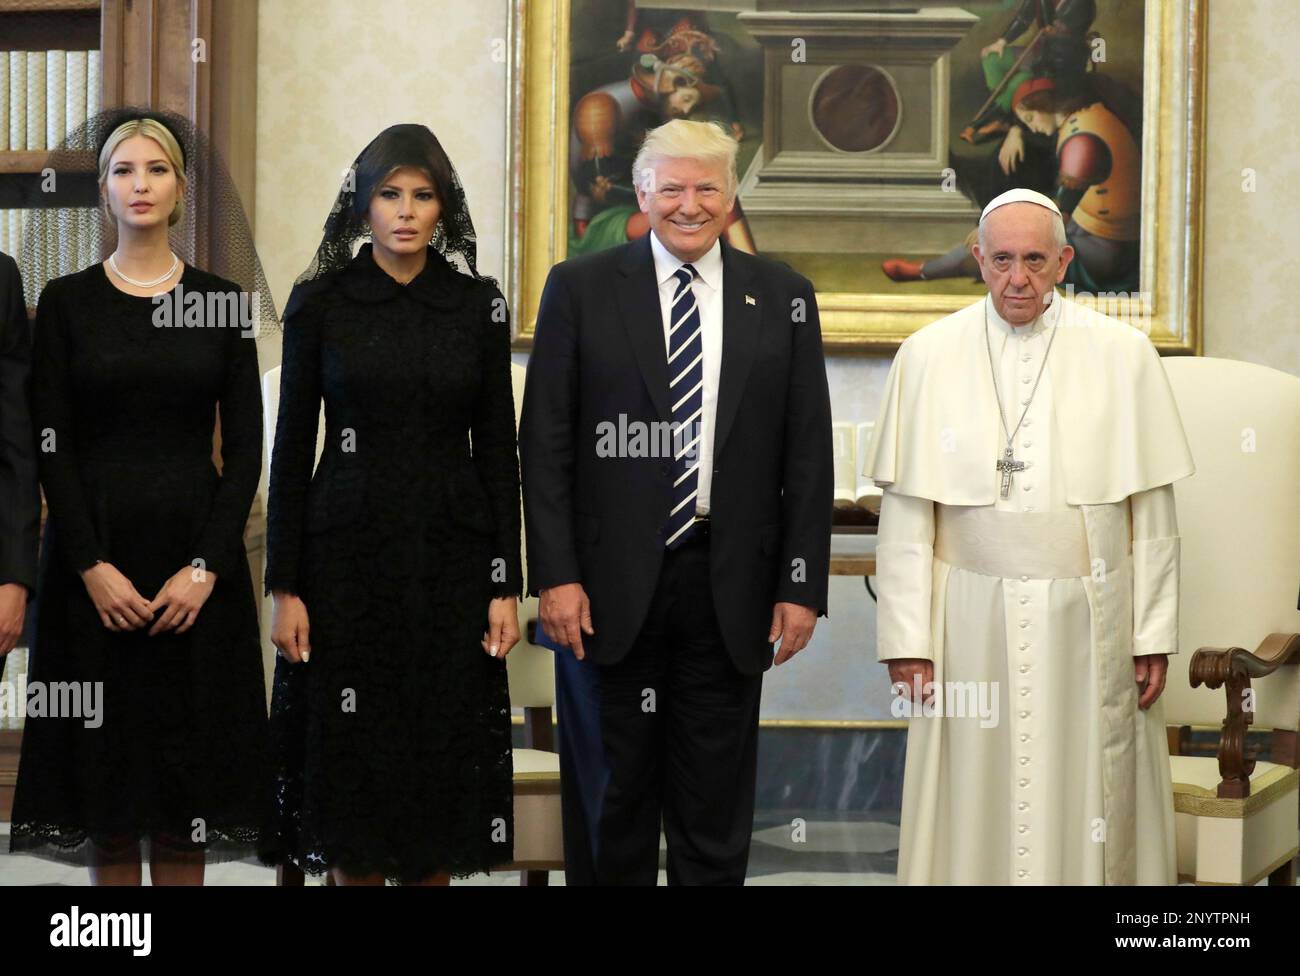 U.S. President Donald Trump, first lady Melania Trump and daughter Ivanka Trump, left, meet with Pope Francis, Wednesday, May 24, 2017, at the Vatican. (AP Photo/Evan Vucci, Pool) Stock Photo